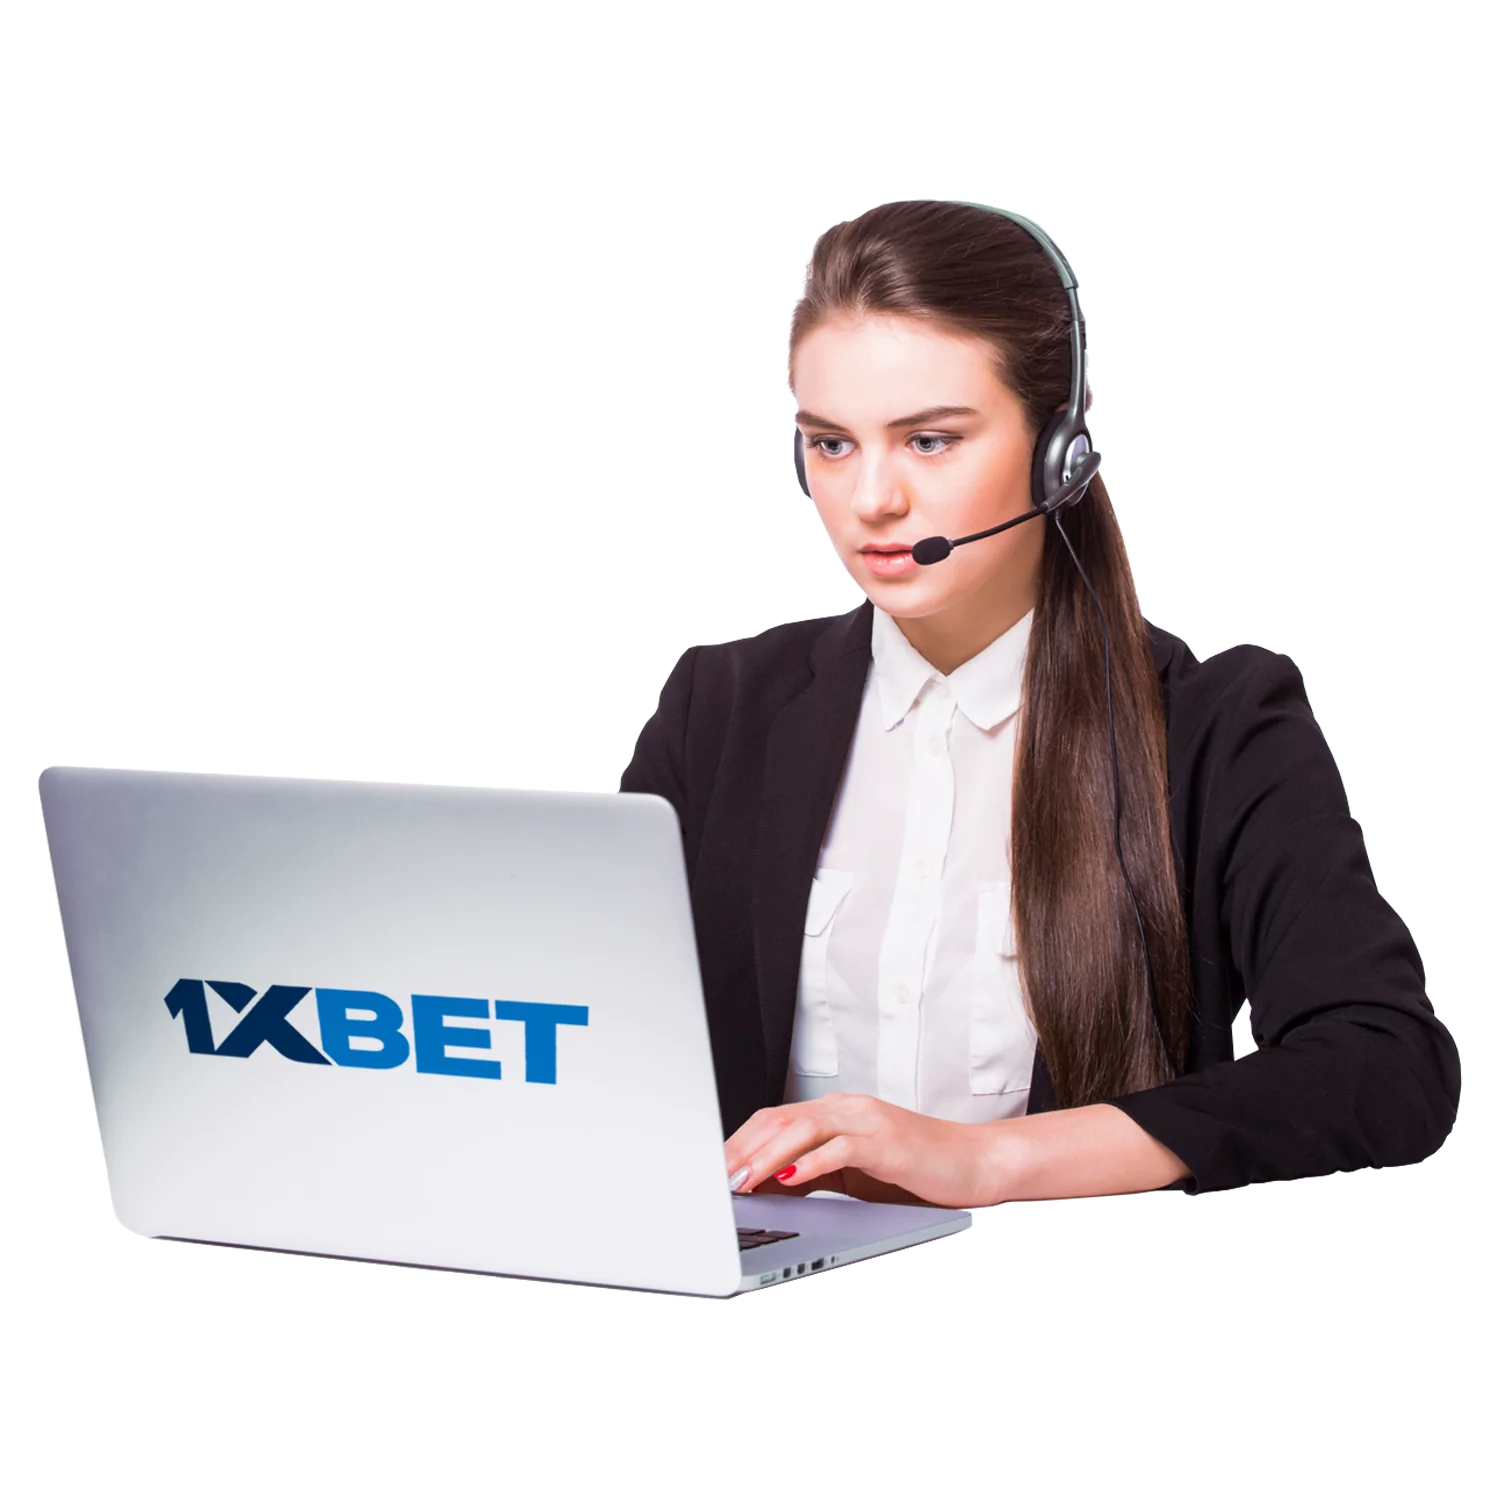 1xBet customer service in India is available around the clock.